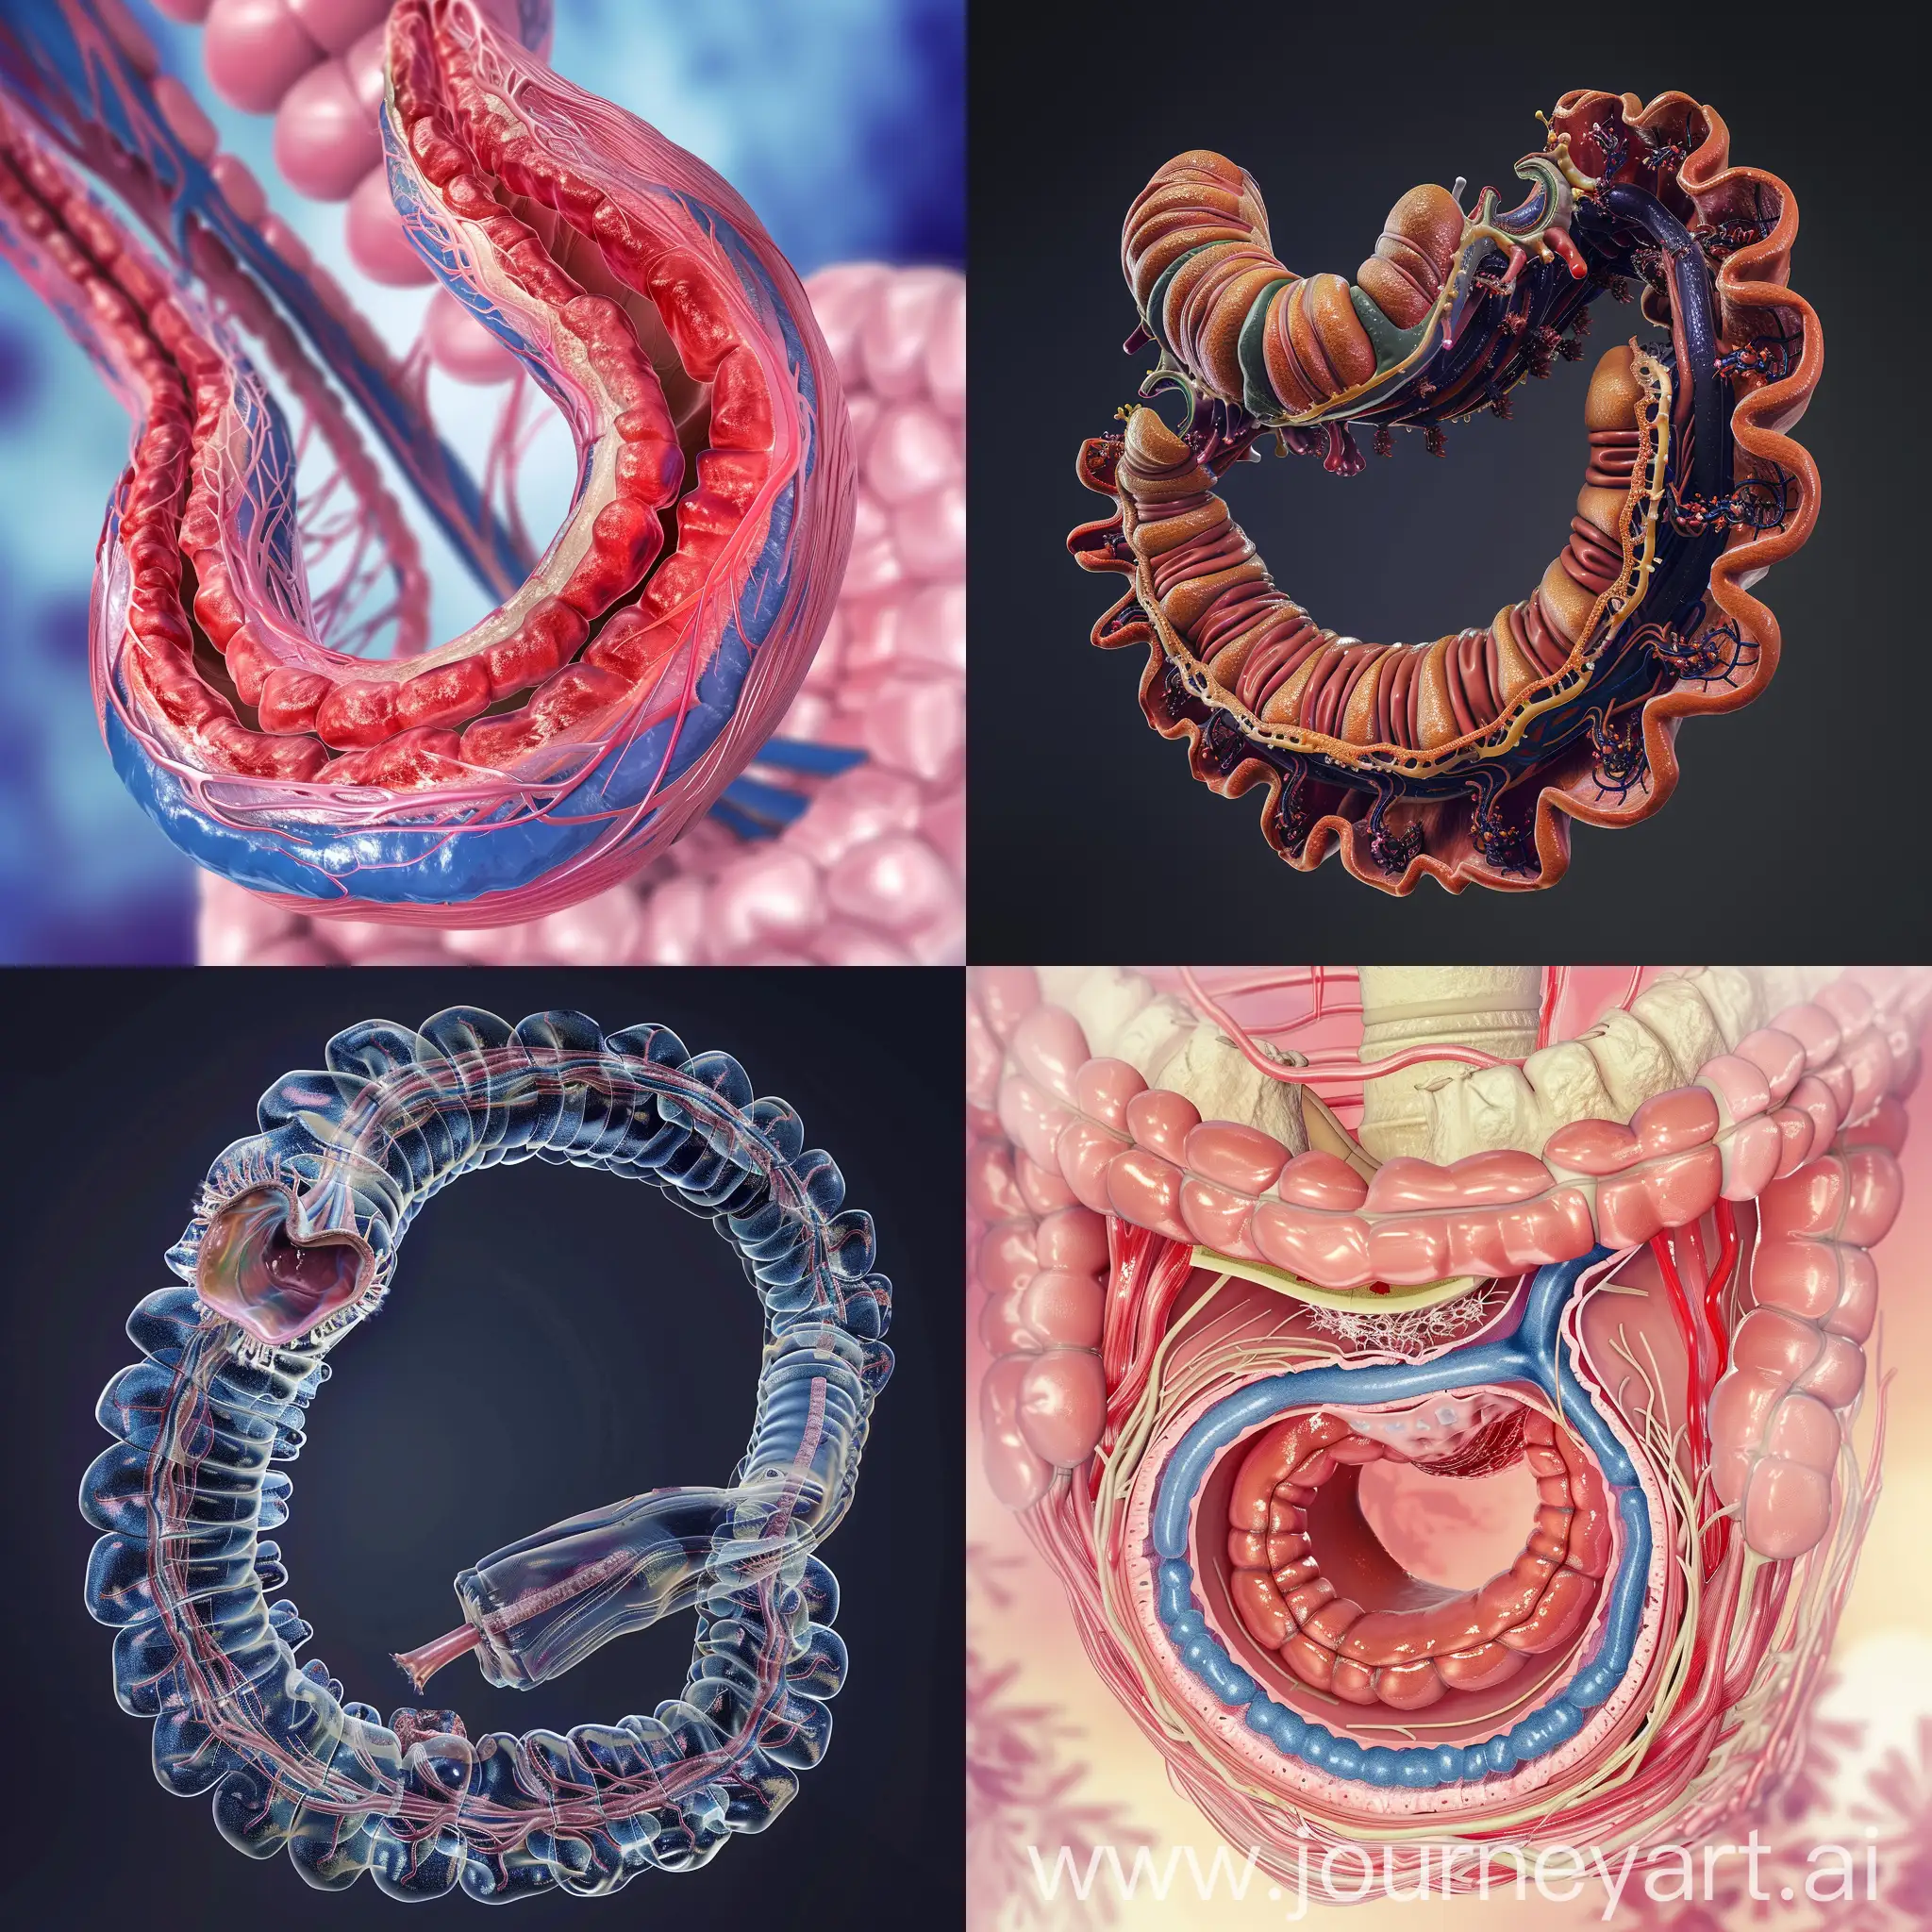 Anatomical-Illustration-of-Colonic-Diverticulum-in-Netters-Style